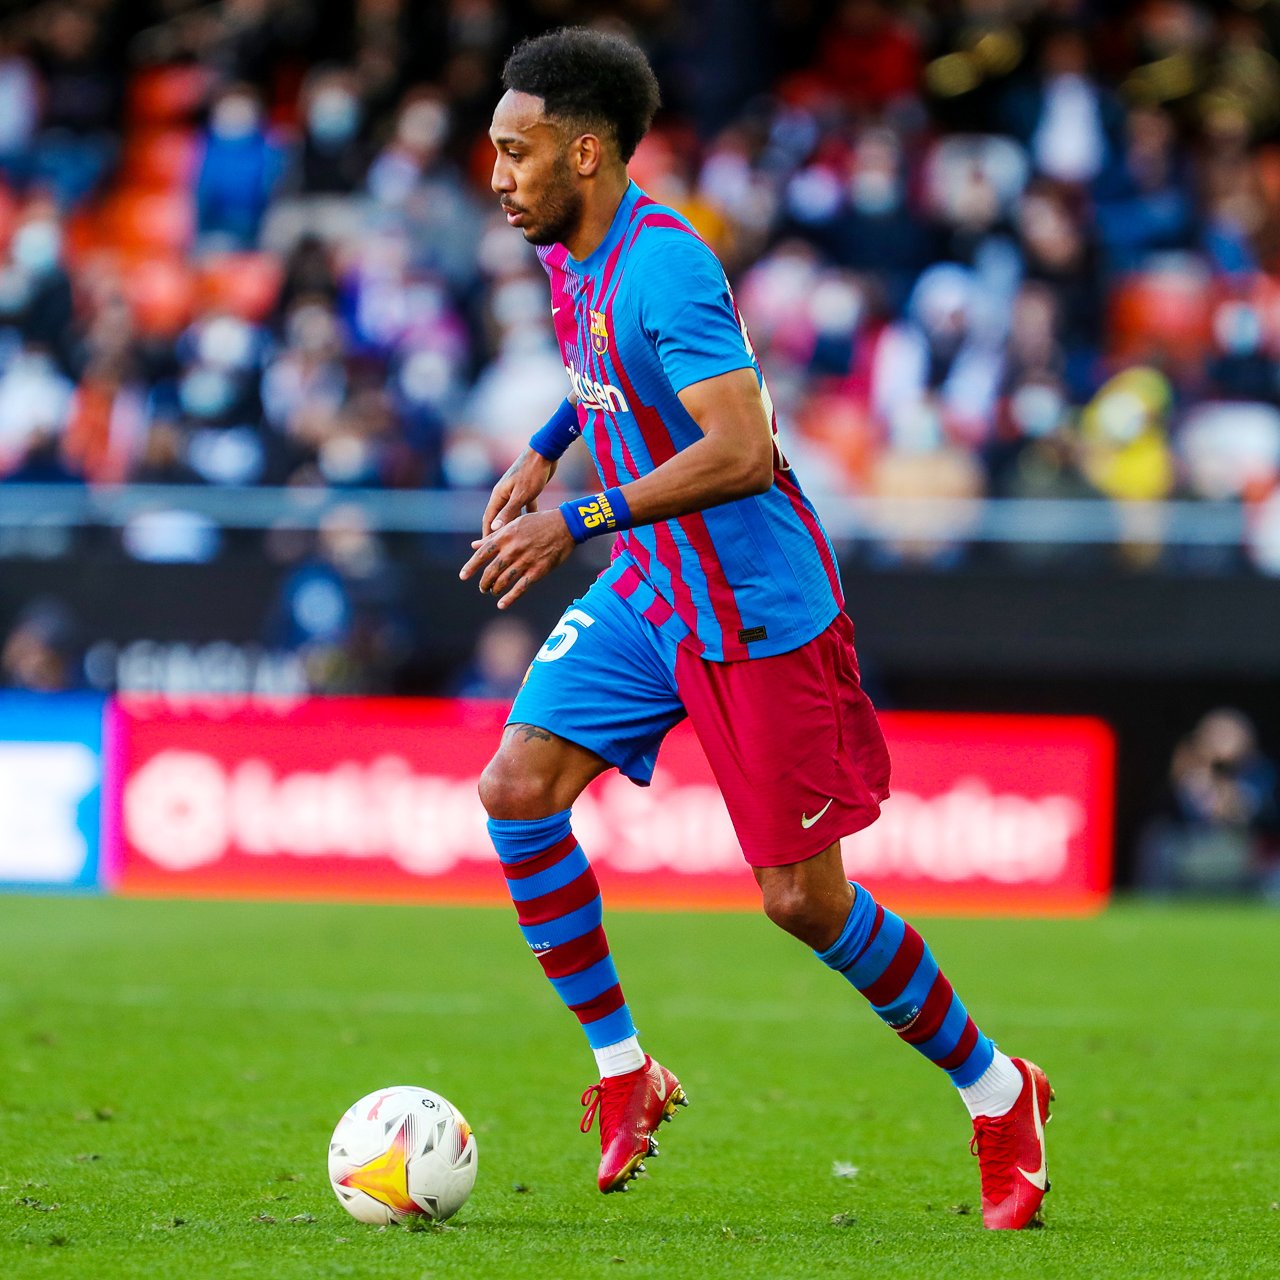 Valencia 1-4 Barcelona: Pierre-Emerick Aubameyang gets off the mark after scoring his first hattrick for Barcelona as they beat Valencia in stunning fashion 